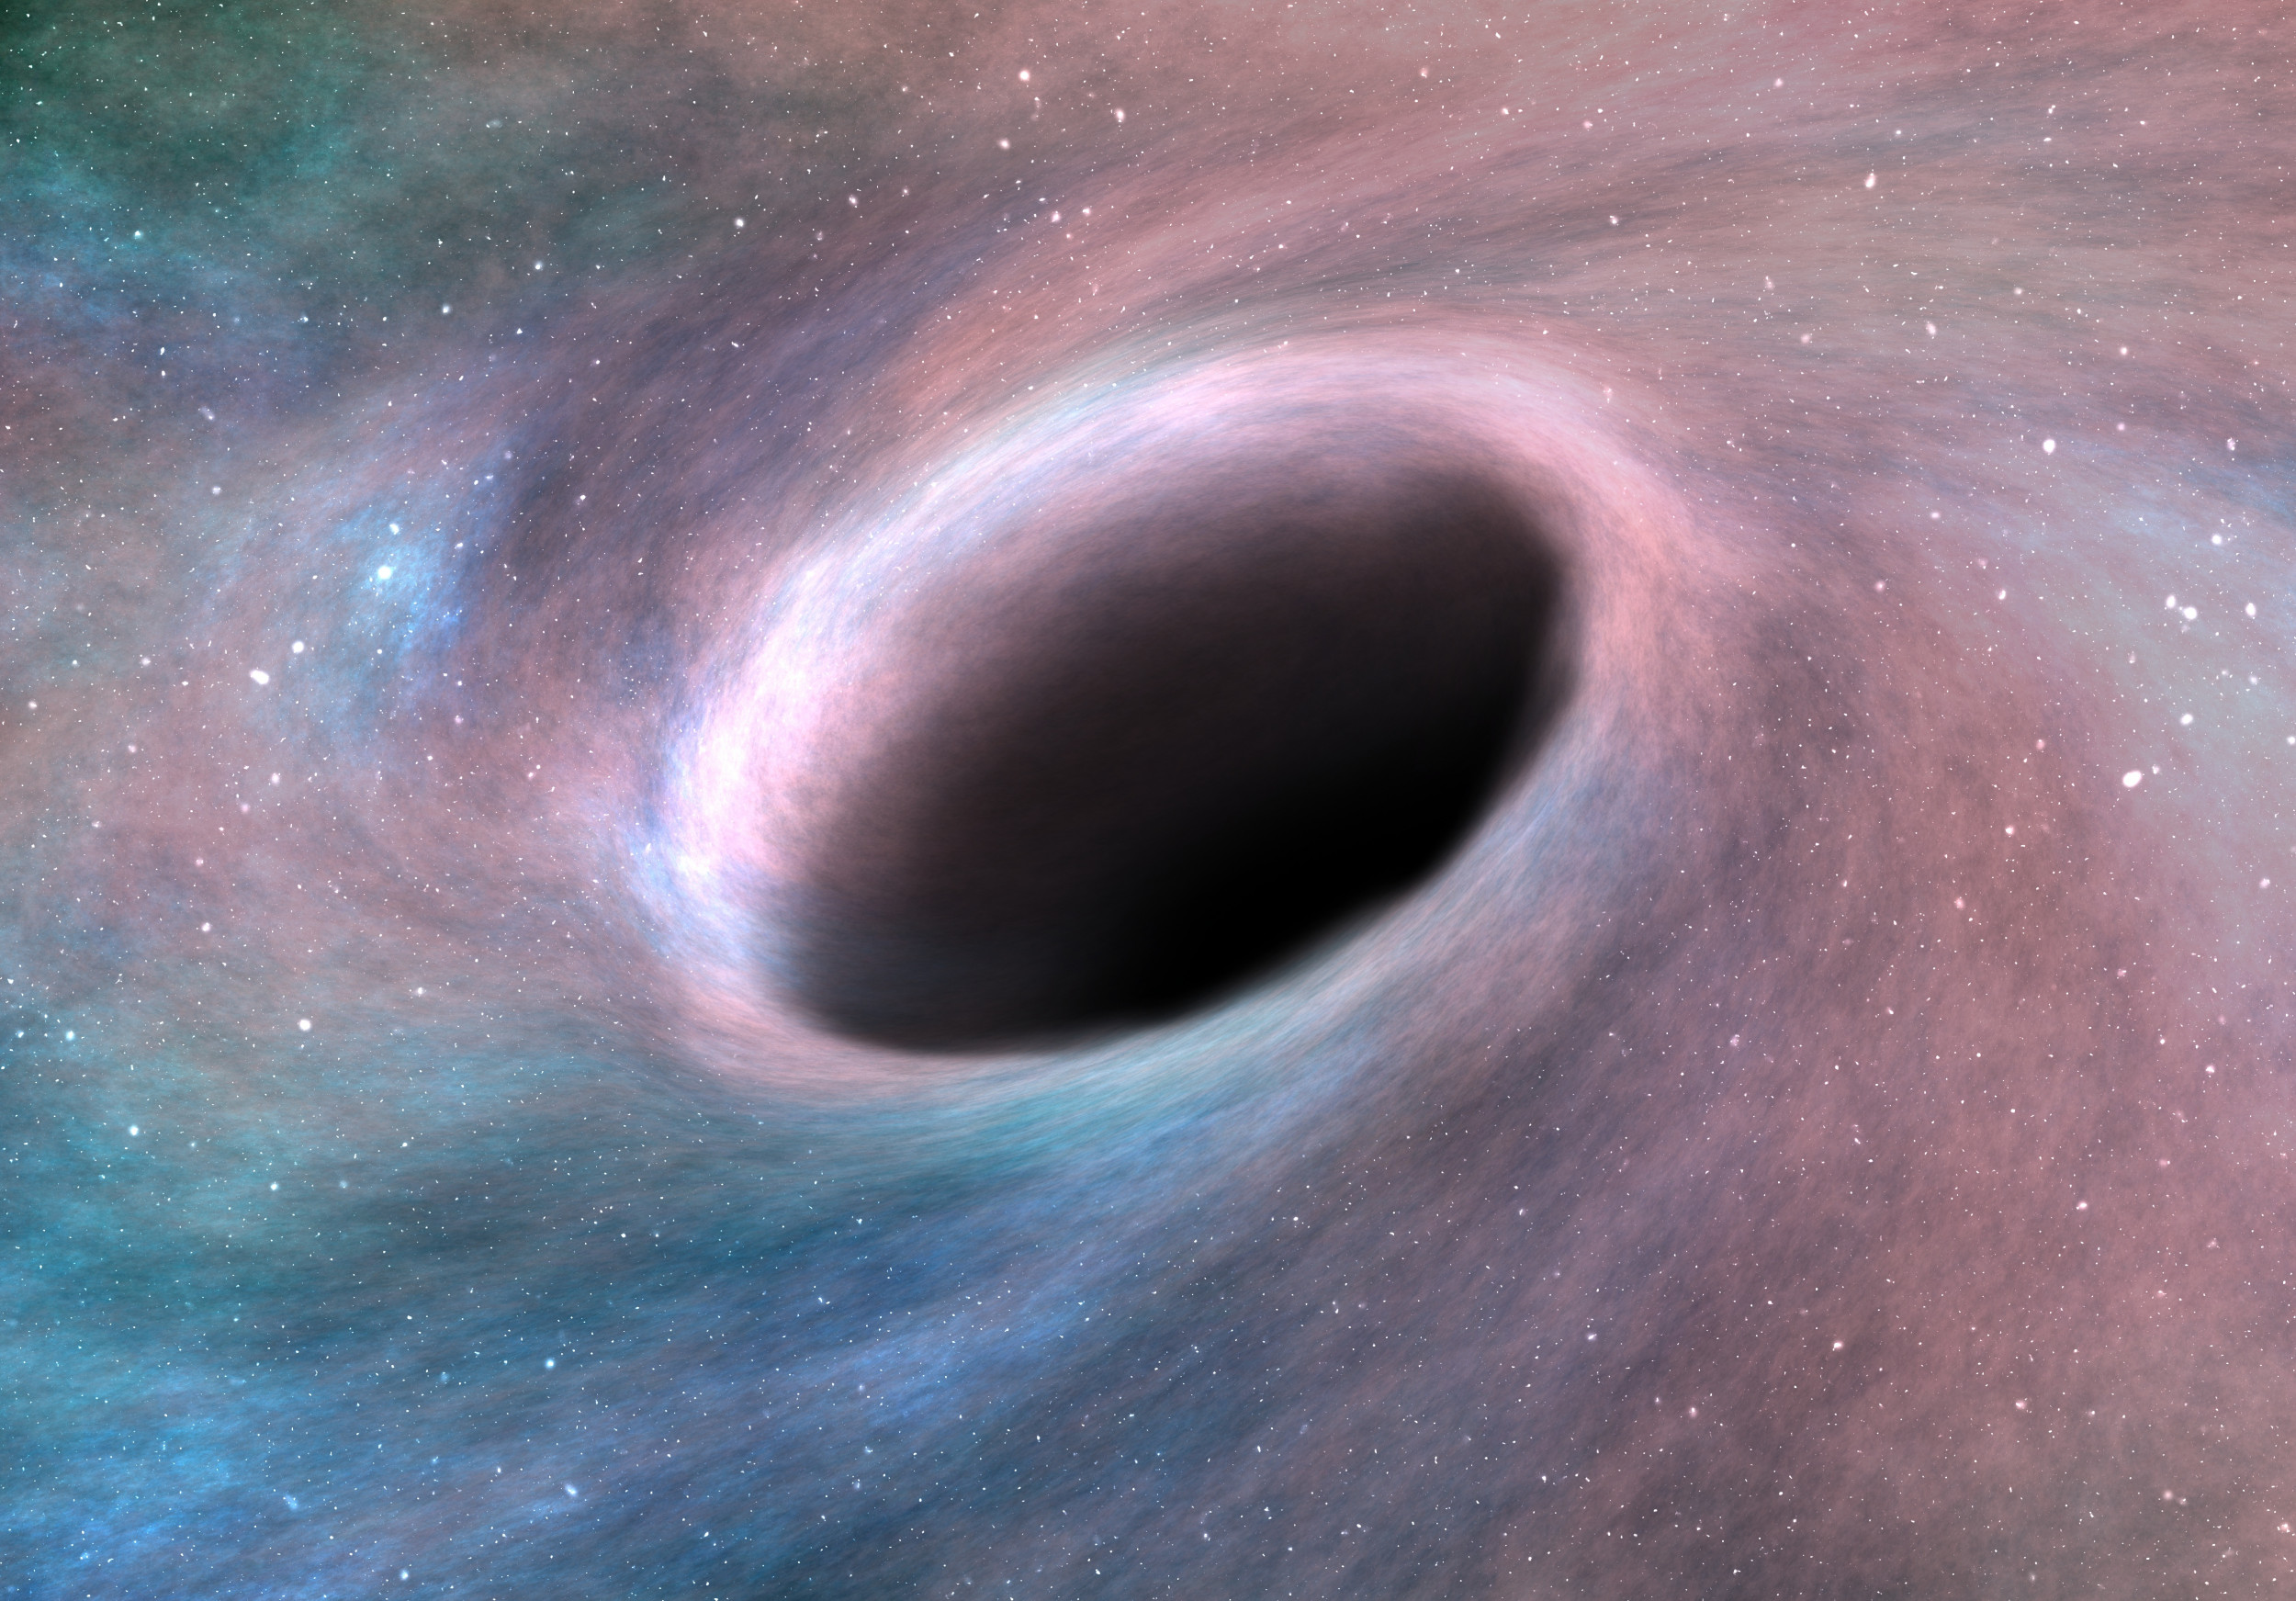 If You Fell Into a Black Hole, You'd Be Frozen in Space and Time Forever -  RO SCIENCE